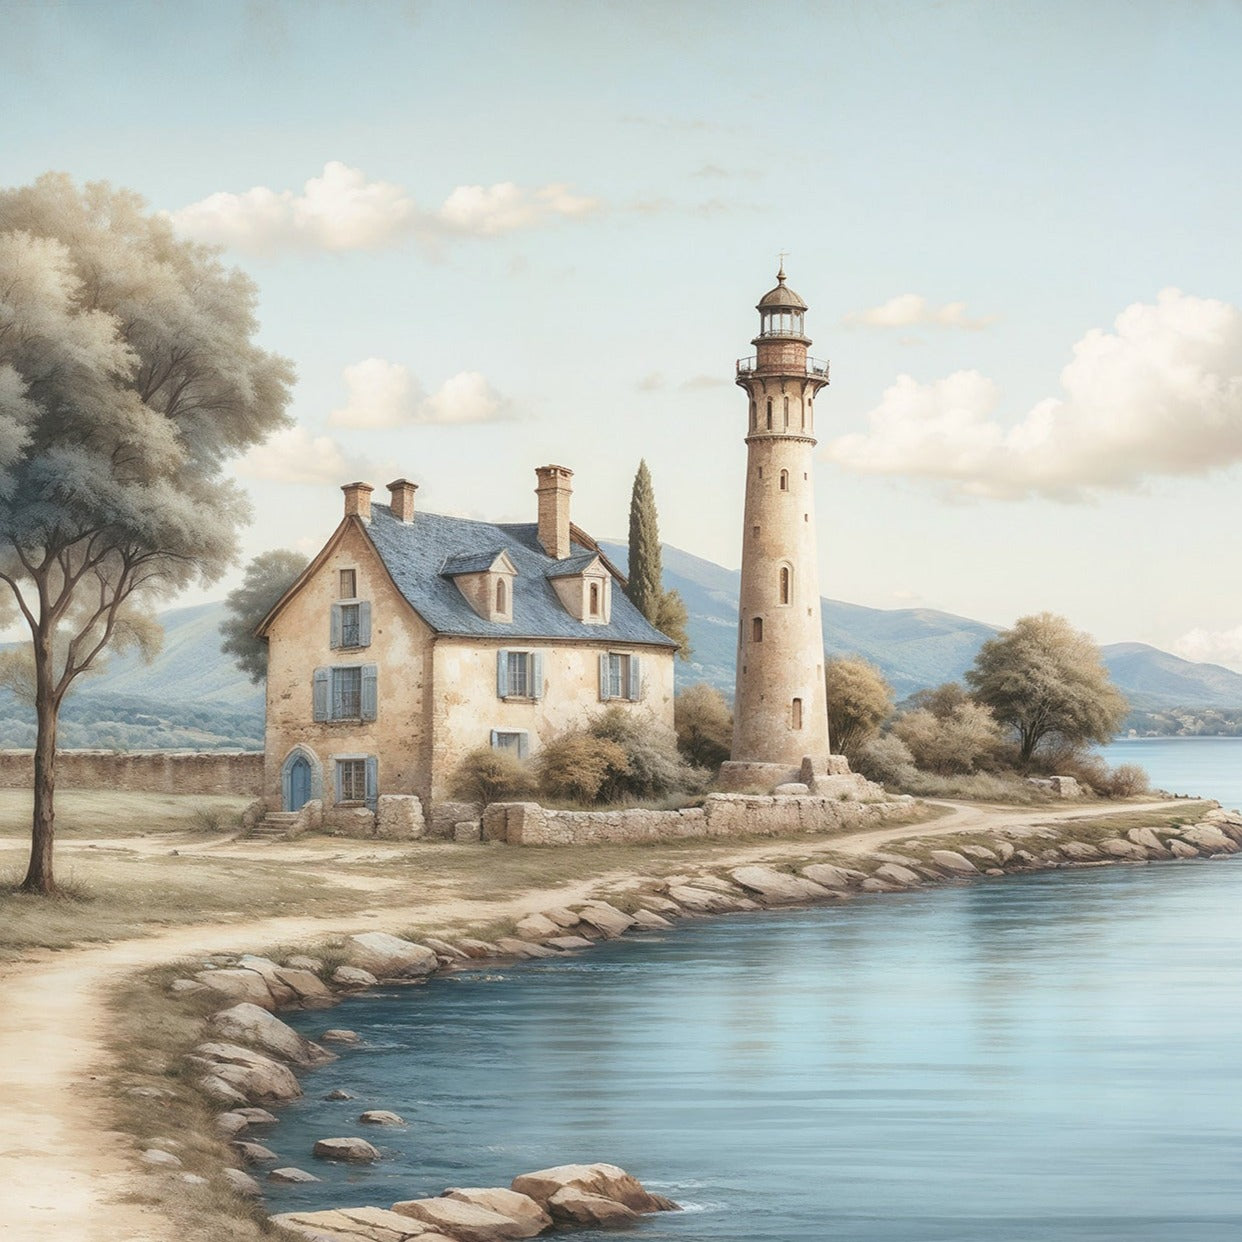 "Quaint lighthouse and cottage by the lake in 'A Land Far Away' mural in a child's room."